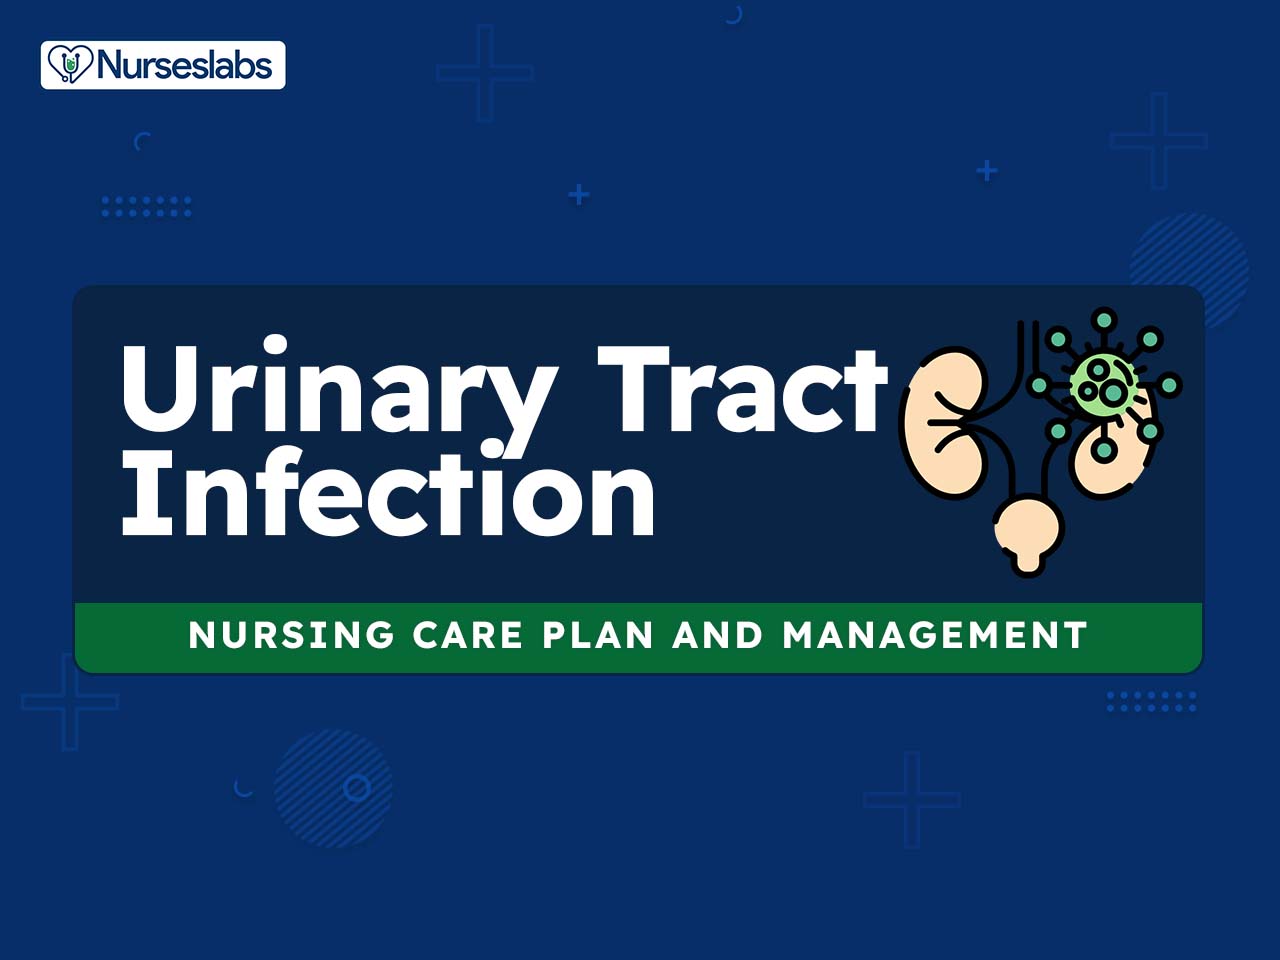 7 Urinary Tract Infection Nursing Care Plans - Nurseslabs